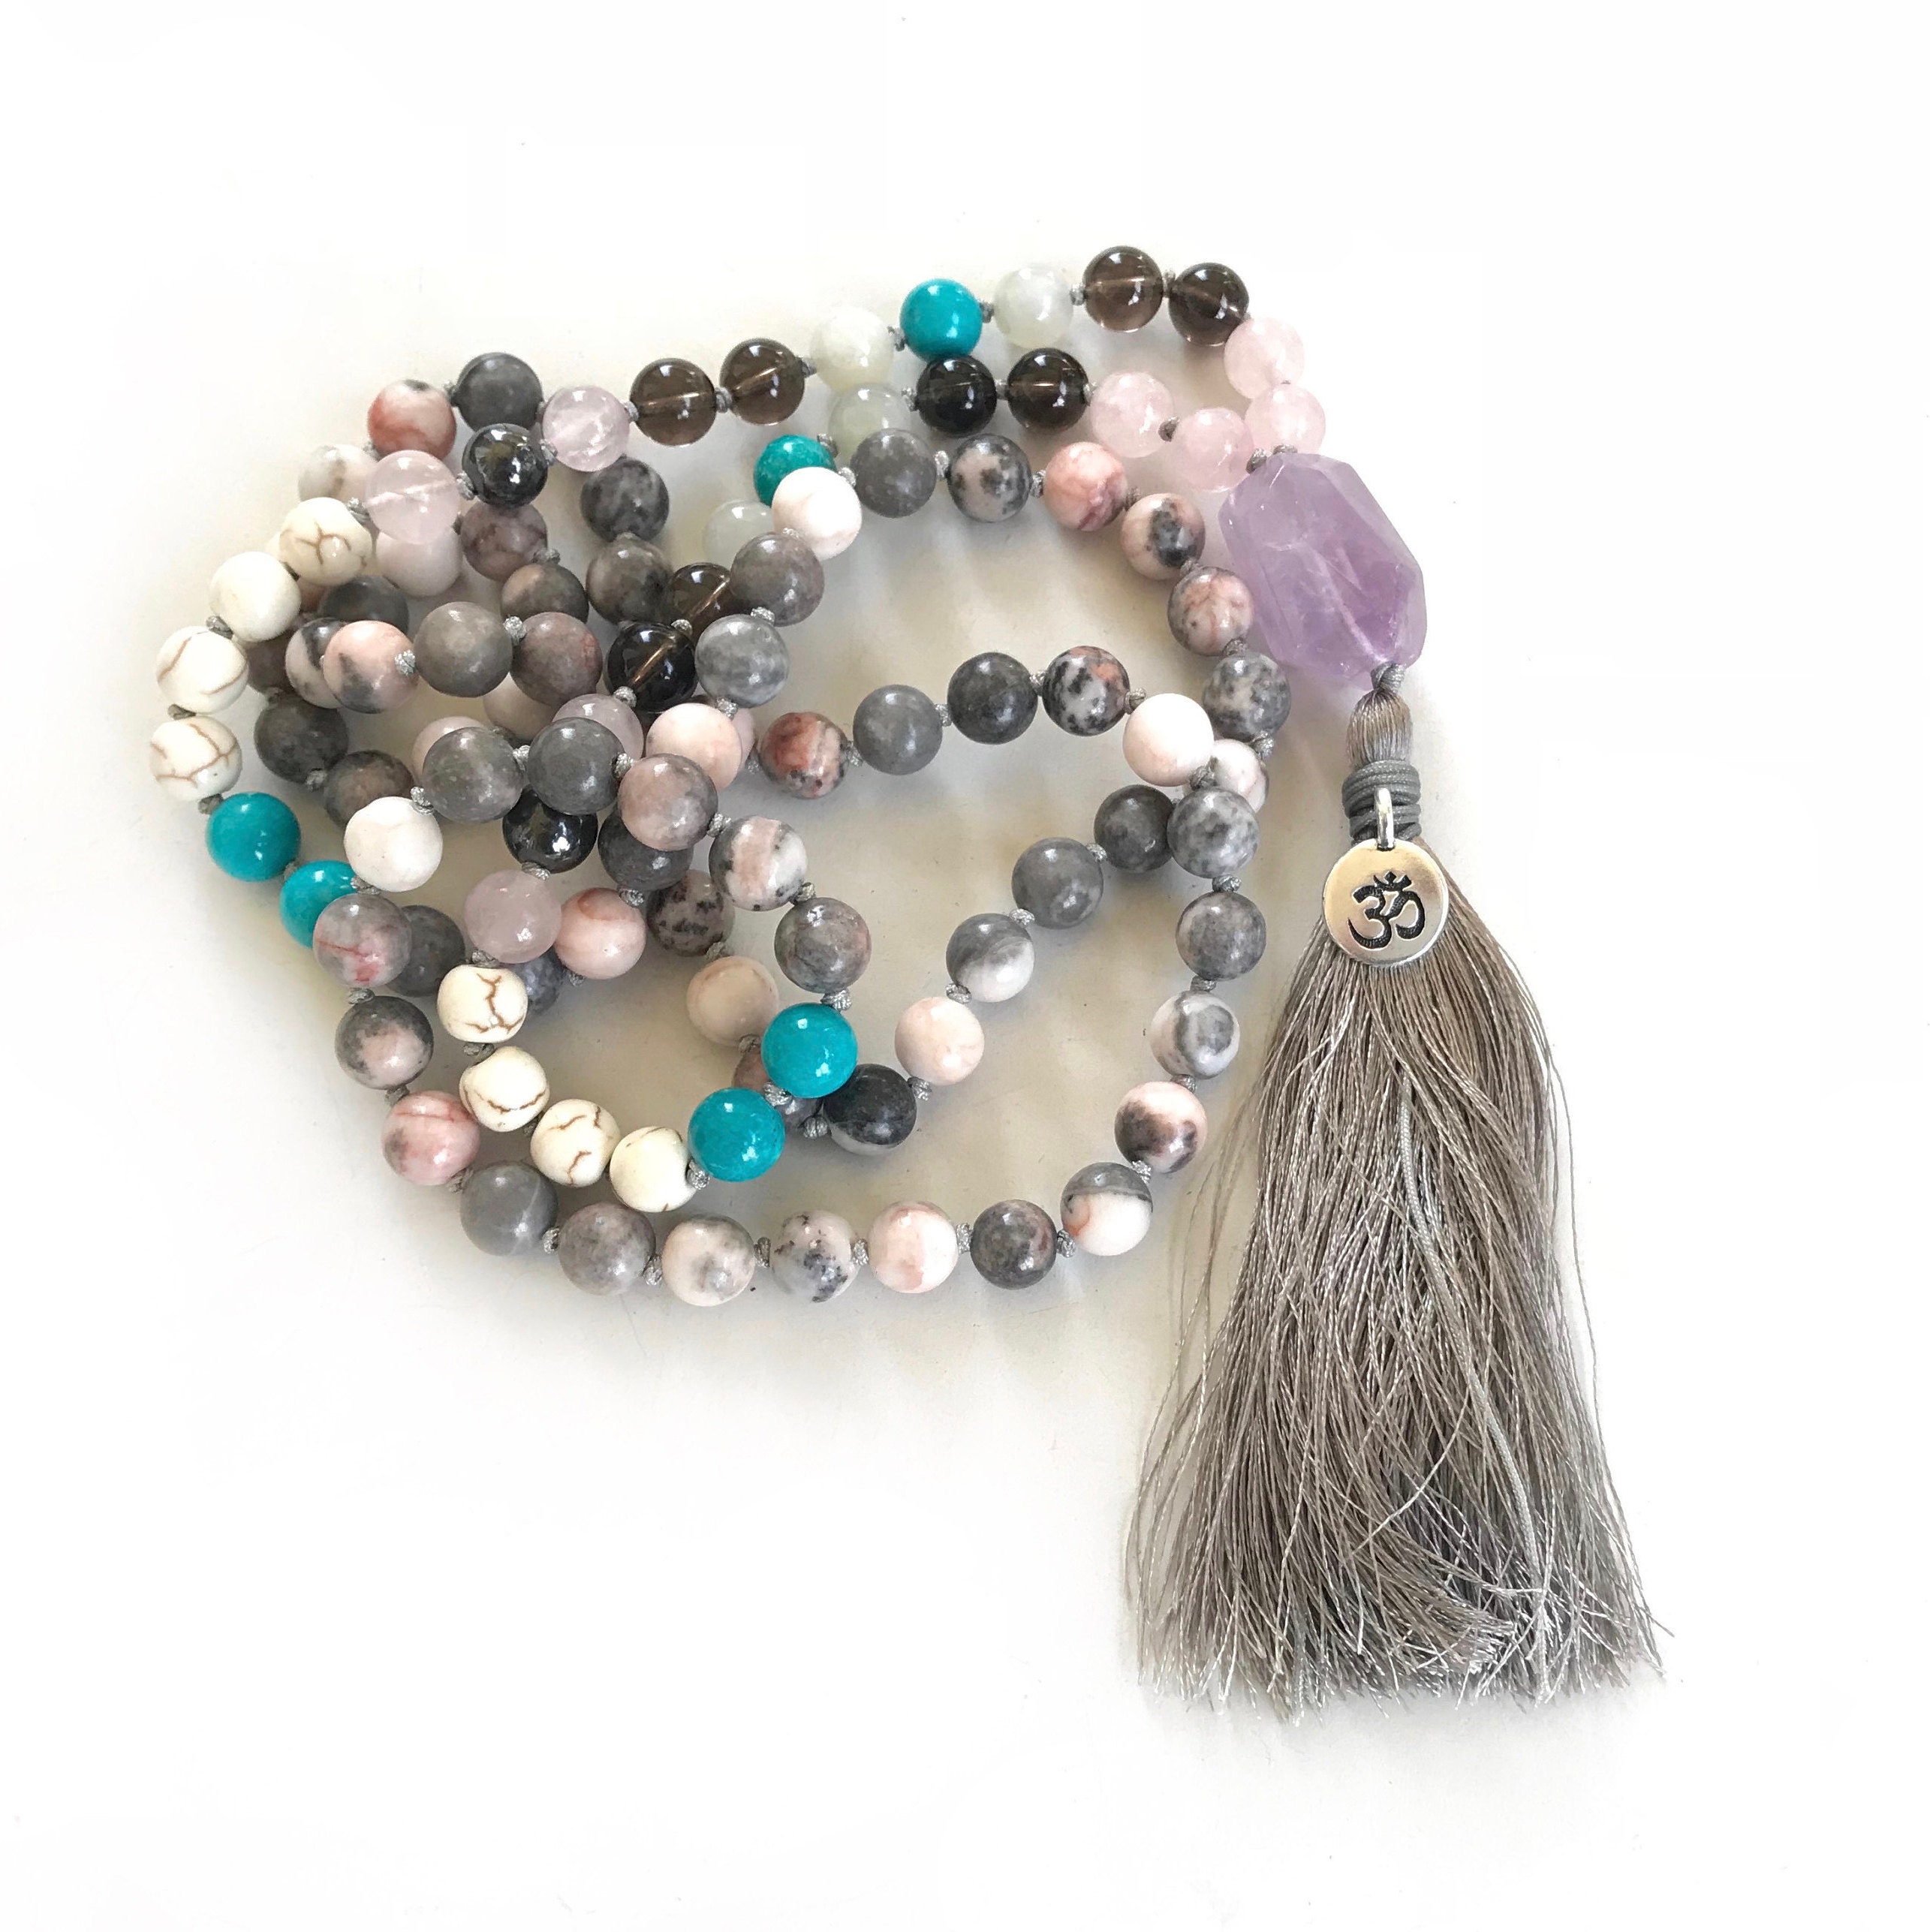 Mala Beads for Meditation - How to Choose, Use, and Cleanse the Mala Beads